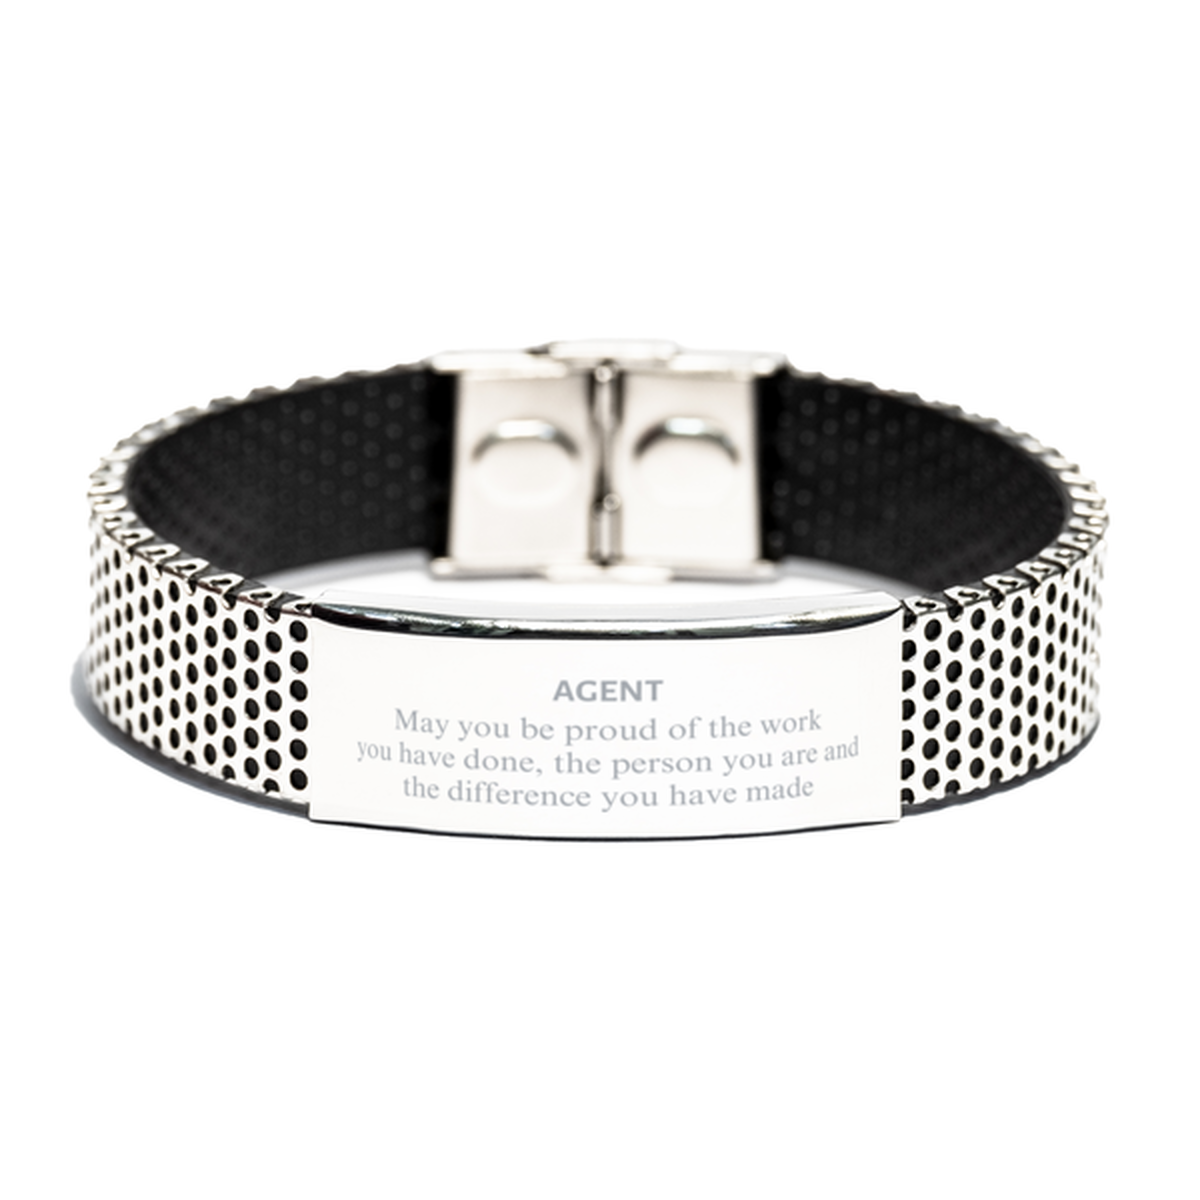 Agent May you be proud of the work you have done, Retirement Agent Stainless Steel Bracelet for Colleague Appreciation Gifts Amazing for Agent